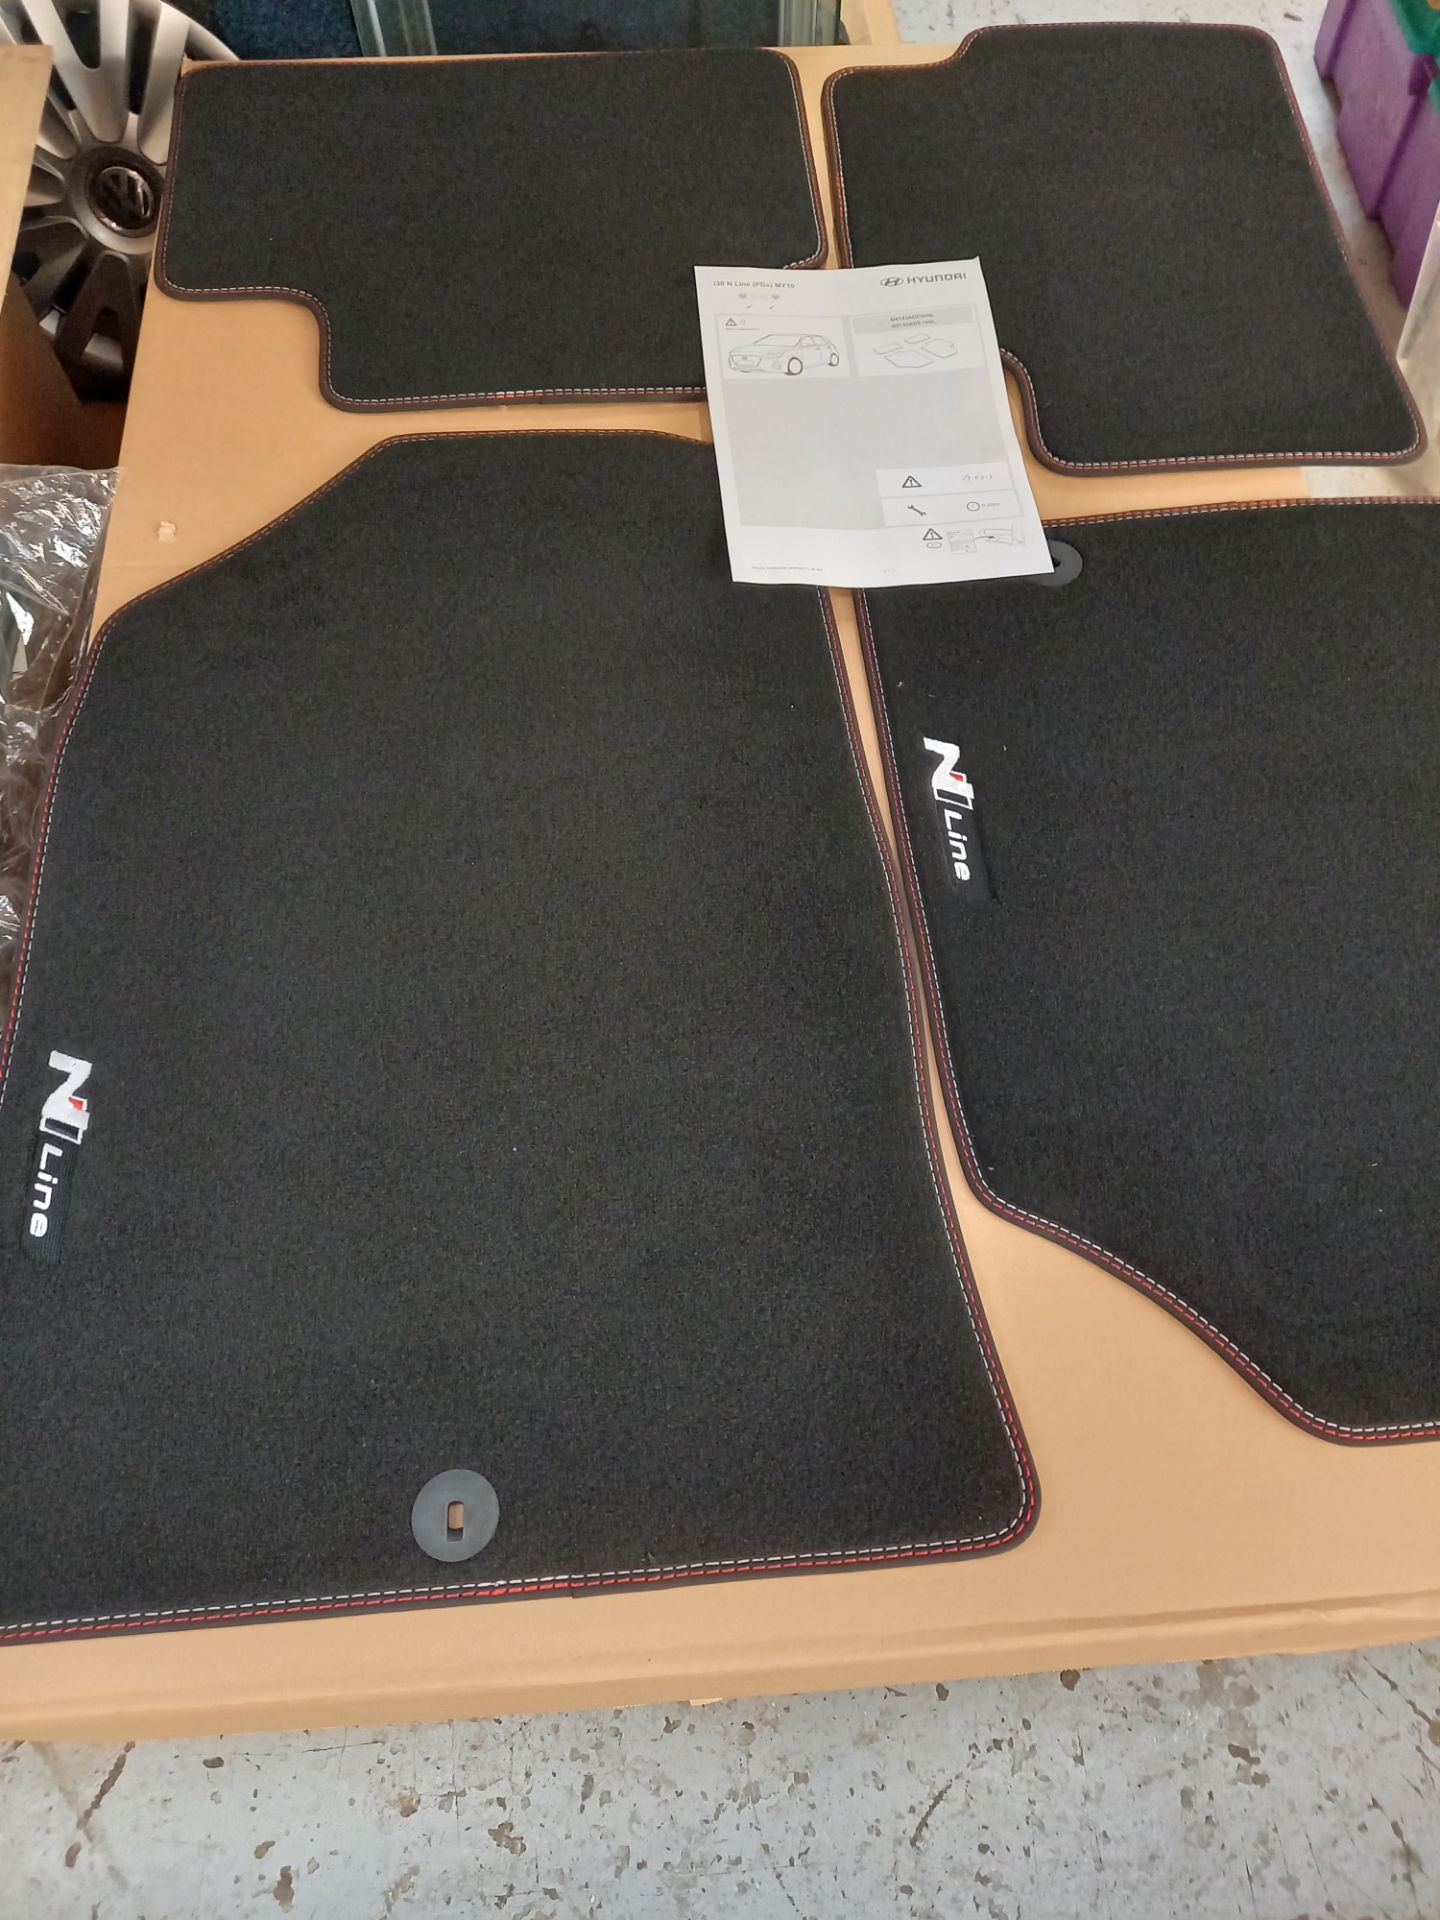 41 X HYUNDAI NEW GENUINE OEM CARPET SETS FOR SANTE FE AND I30 STARTING PRICE IS THE RESERVE PRICE - Image 2 of 6